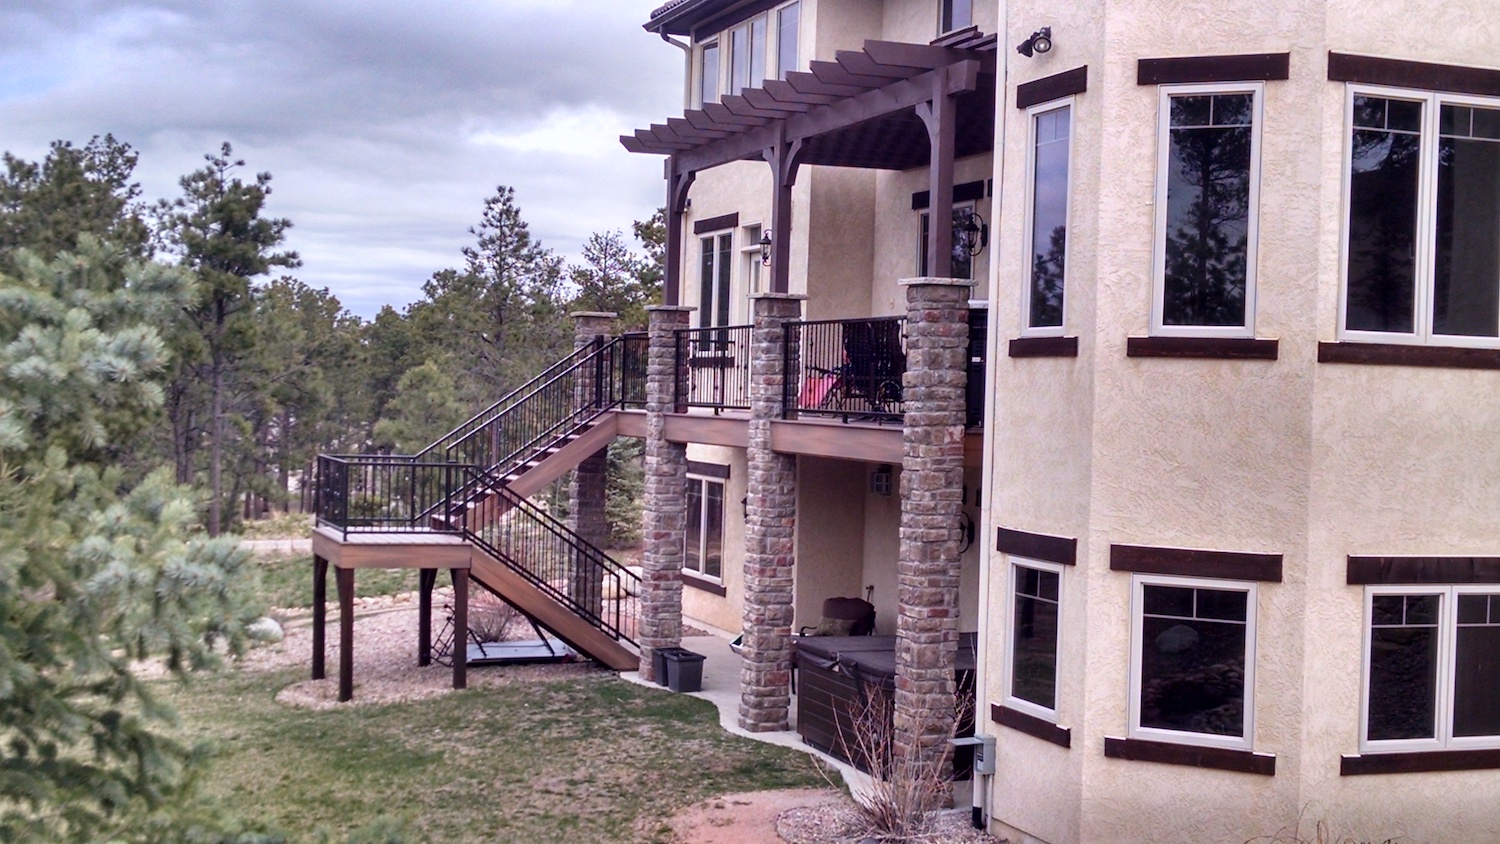 Custom-built composite deck with wrought iron railing